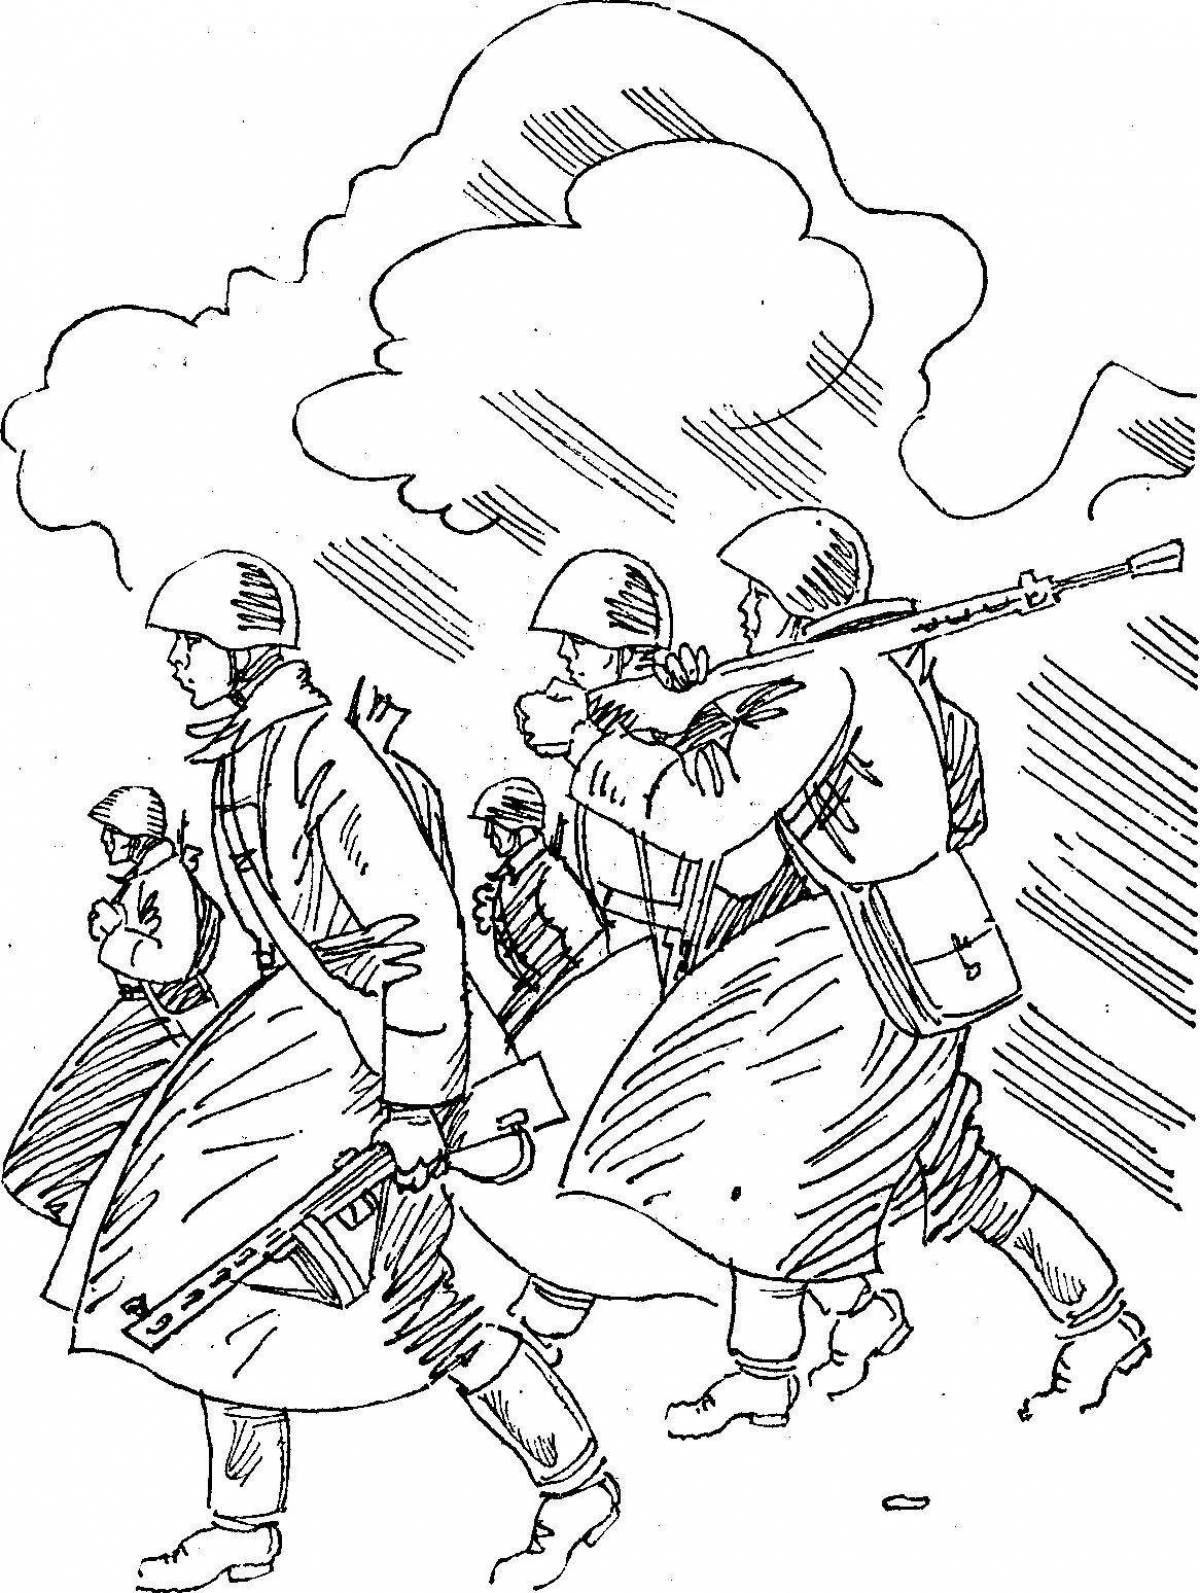 Fabulous coloring pages of the Great Patriotic War for children